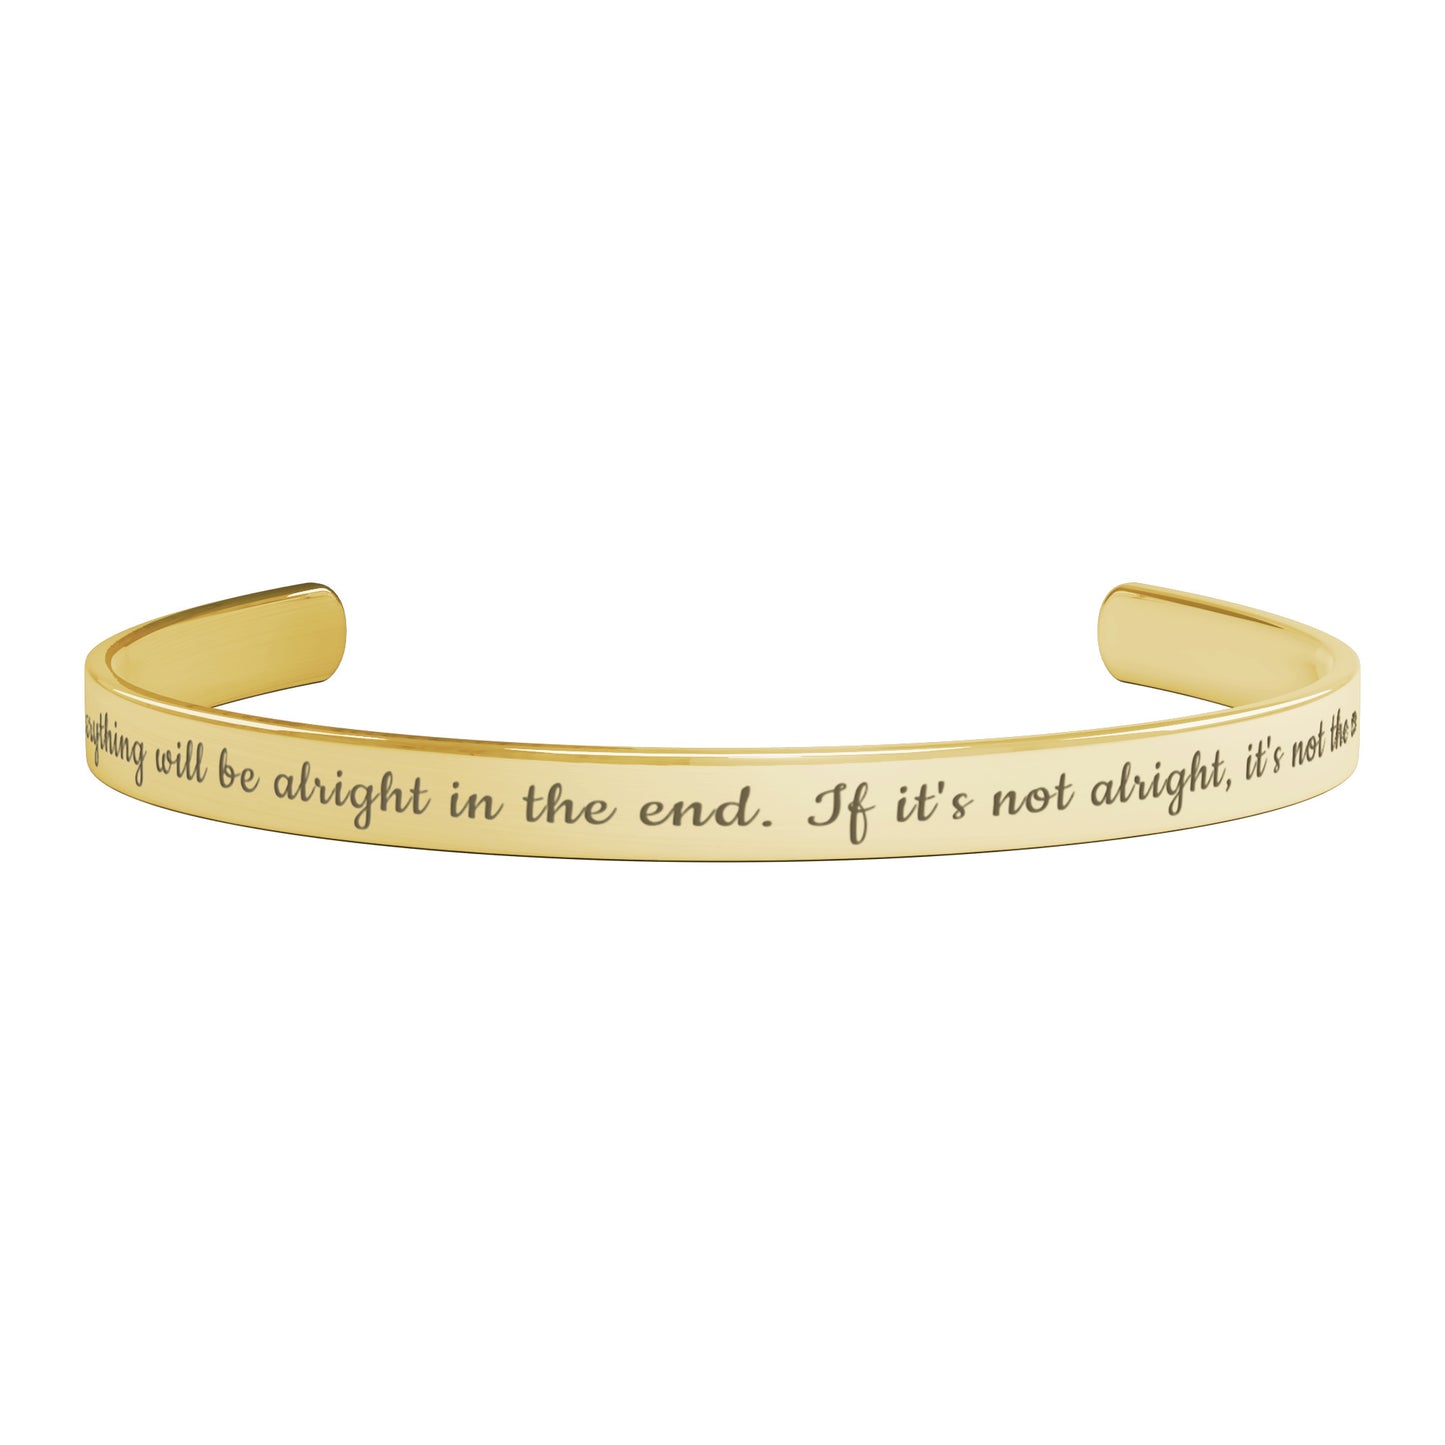 Everything will be alright Cuff Bracelet, Gold, Rose Gold, Silver Cuff Bracelet, Cute Gift, Gift for Wife, Gift for Girlfriend, Jewelry